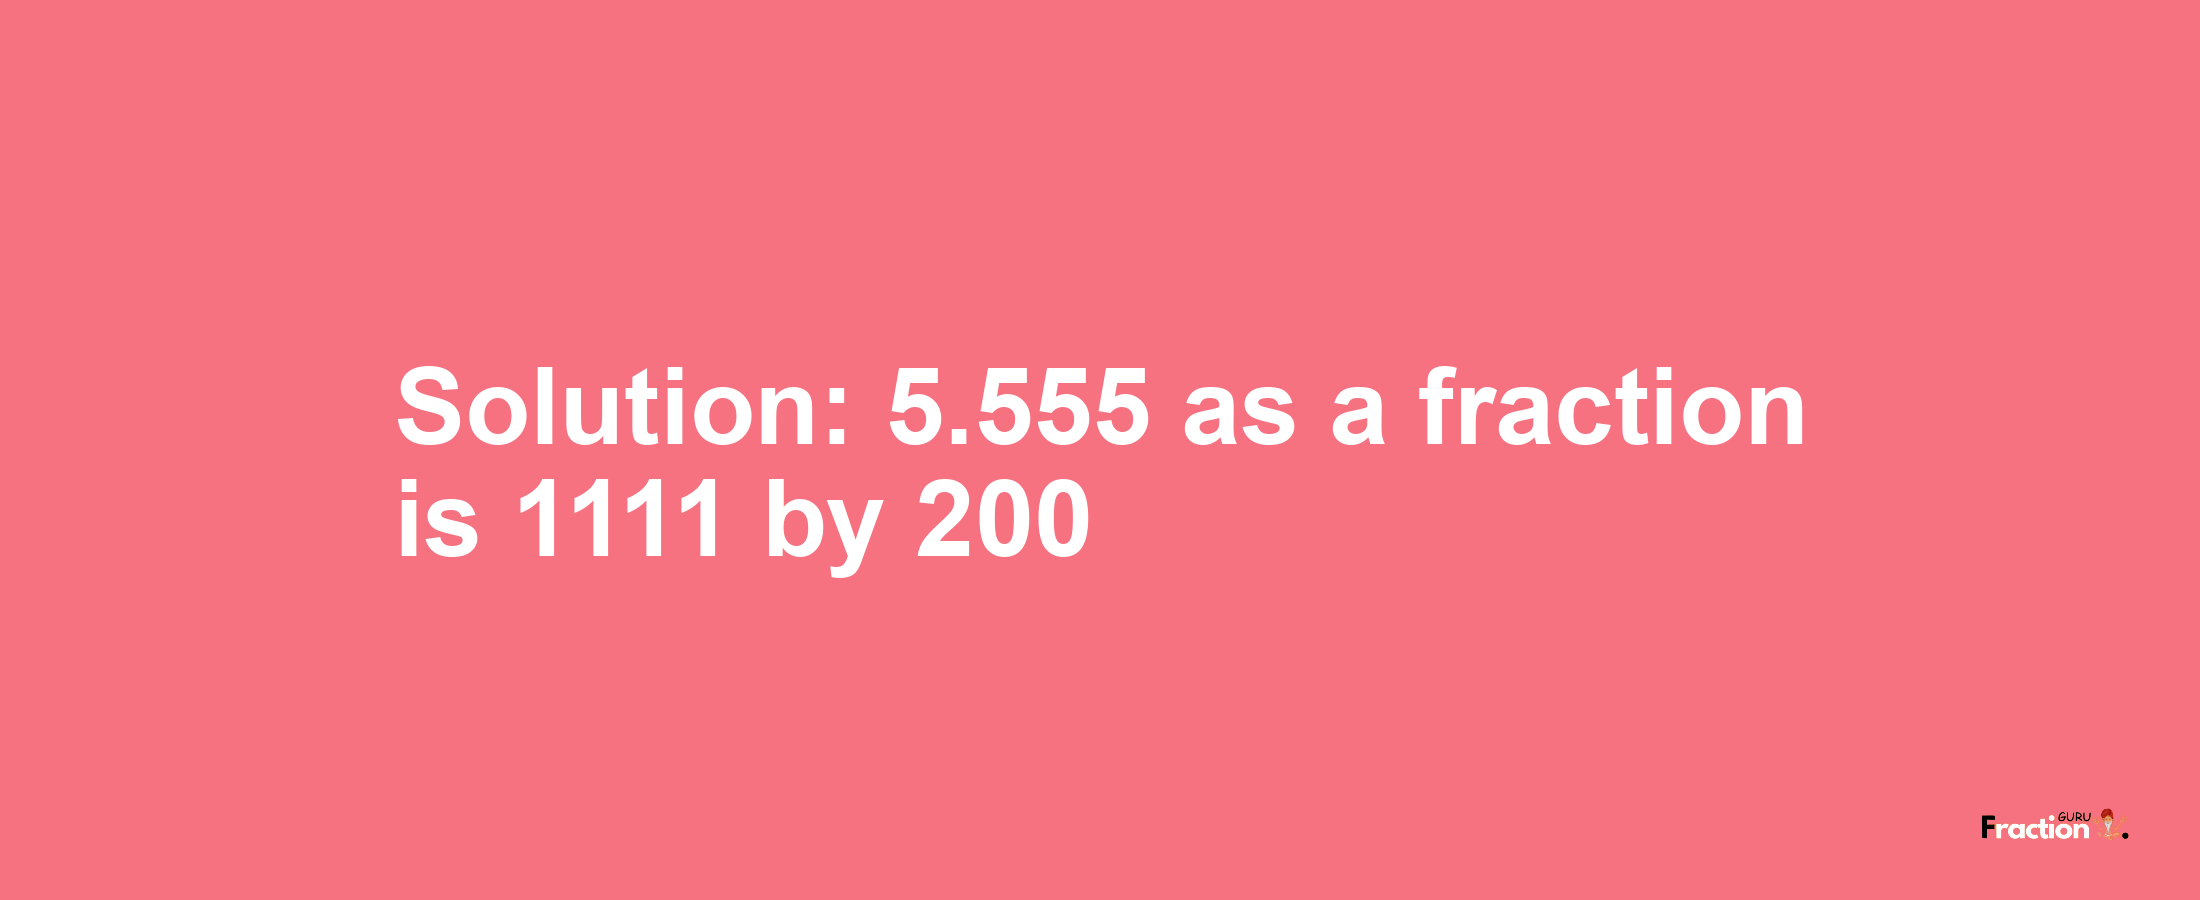 Solution:5.555 as a fraction is 1111/200